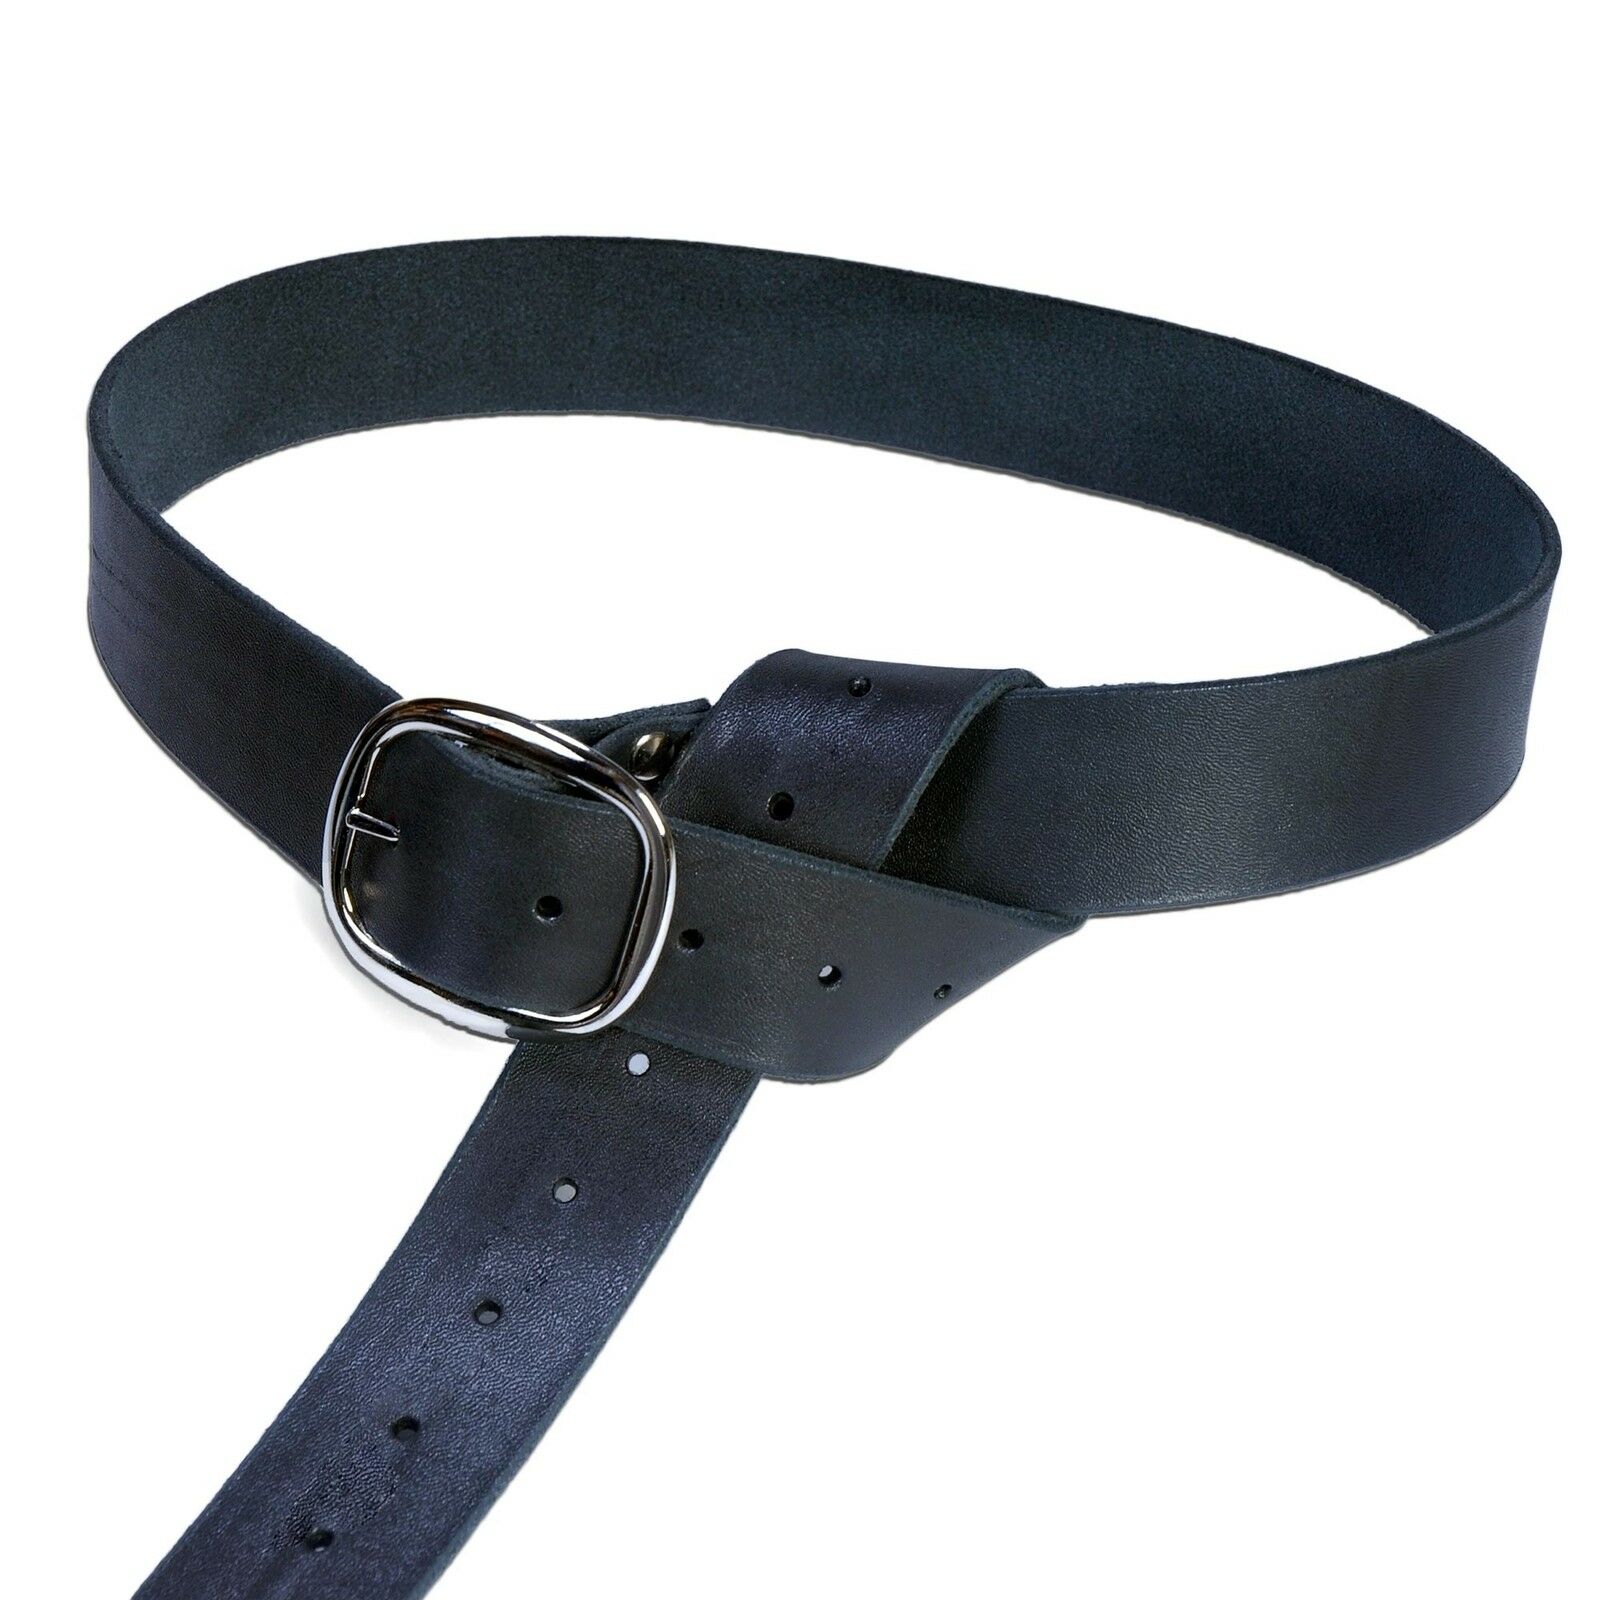 Medieval Buckle Belt From Quality Leather With Steel Buckle 72" Long